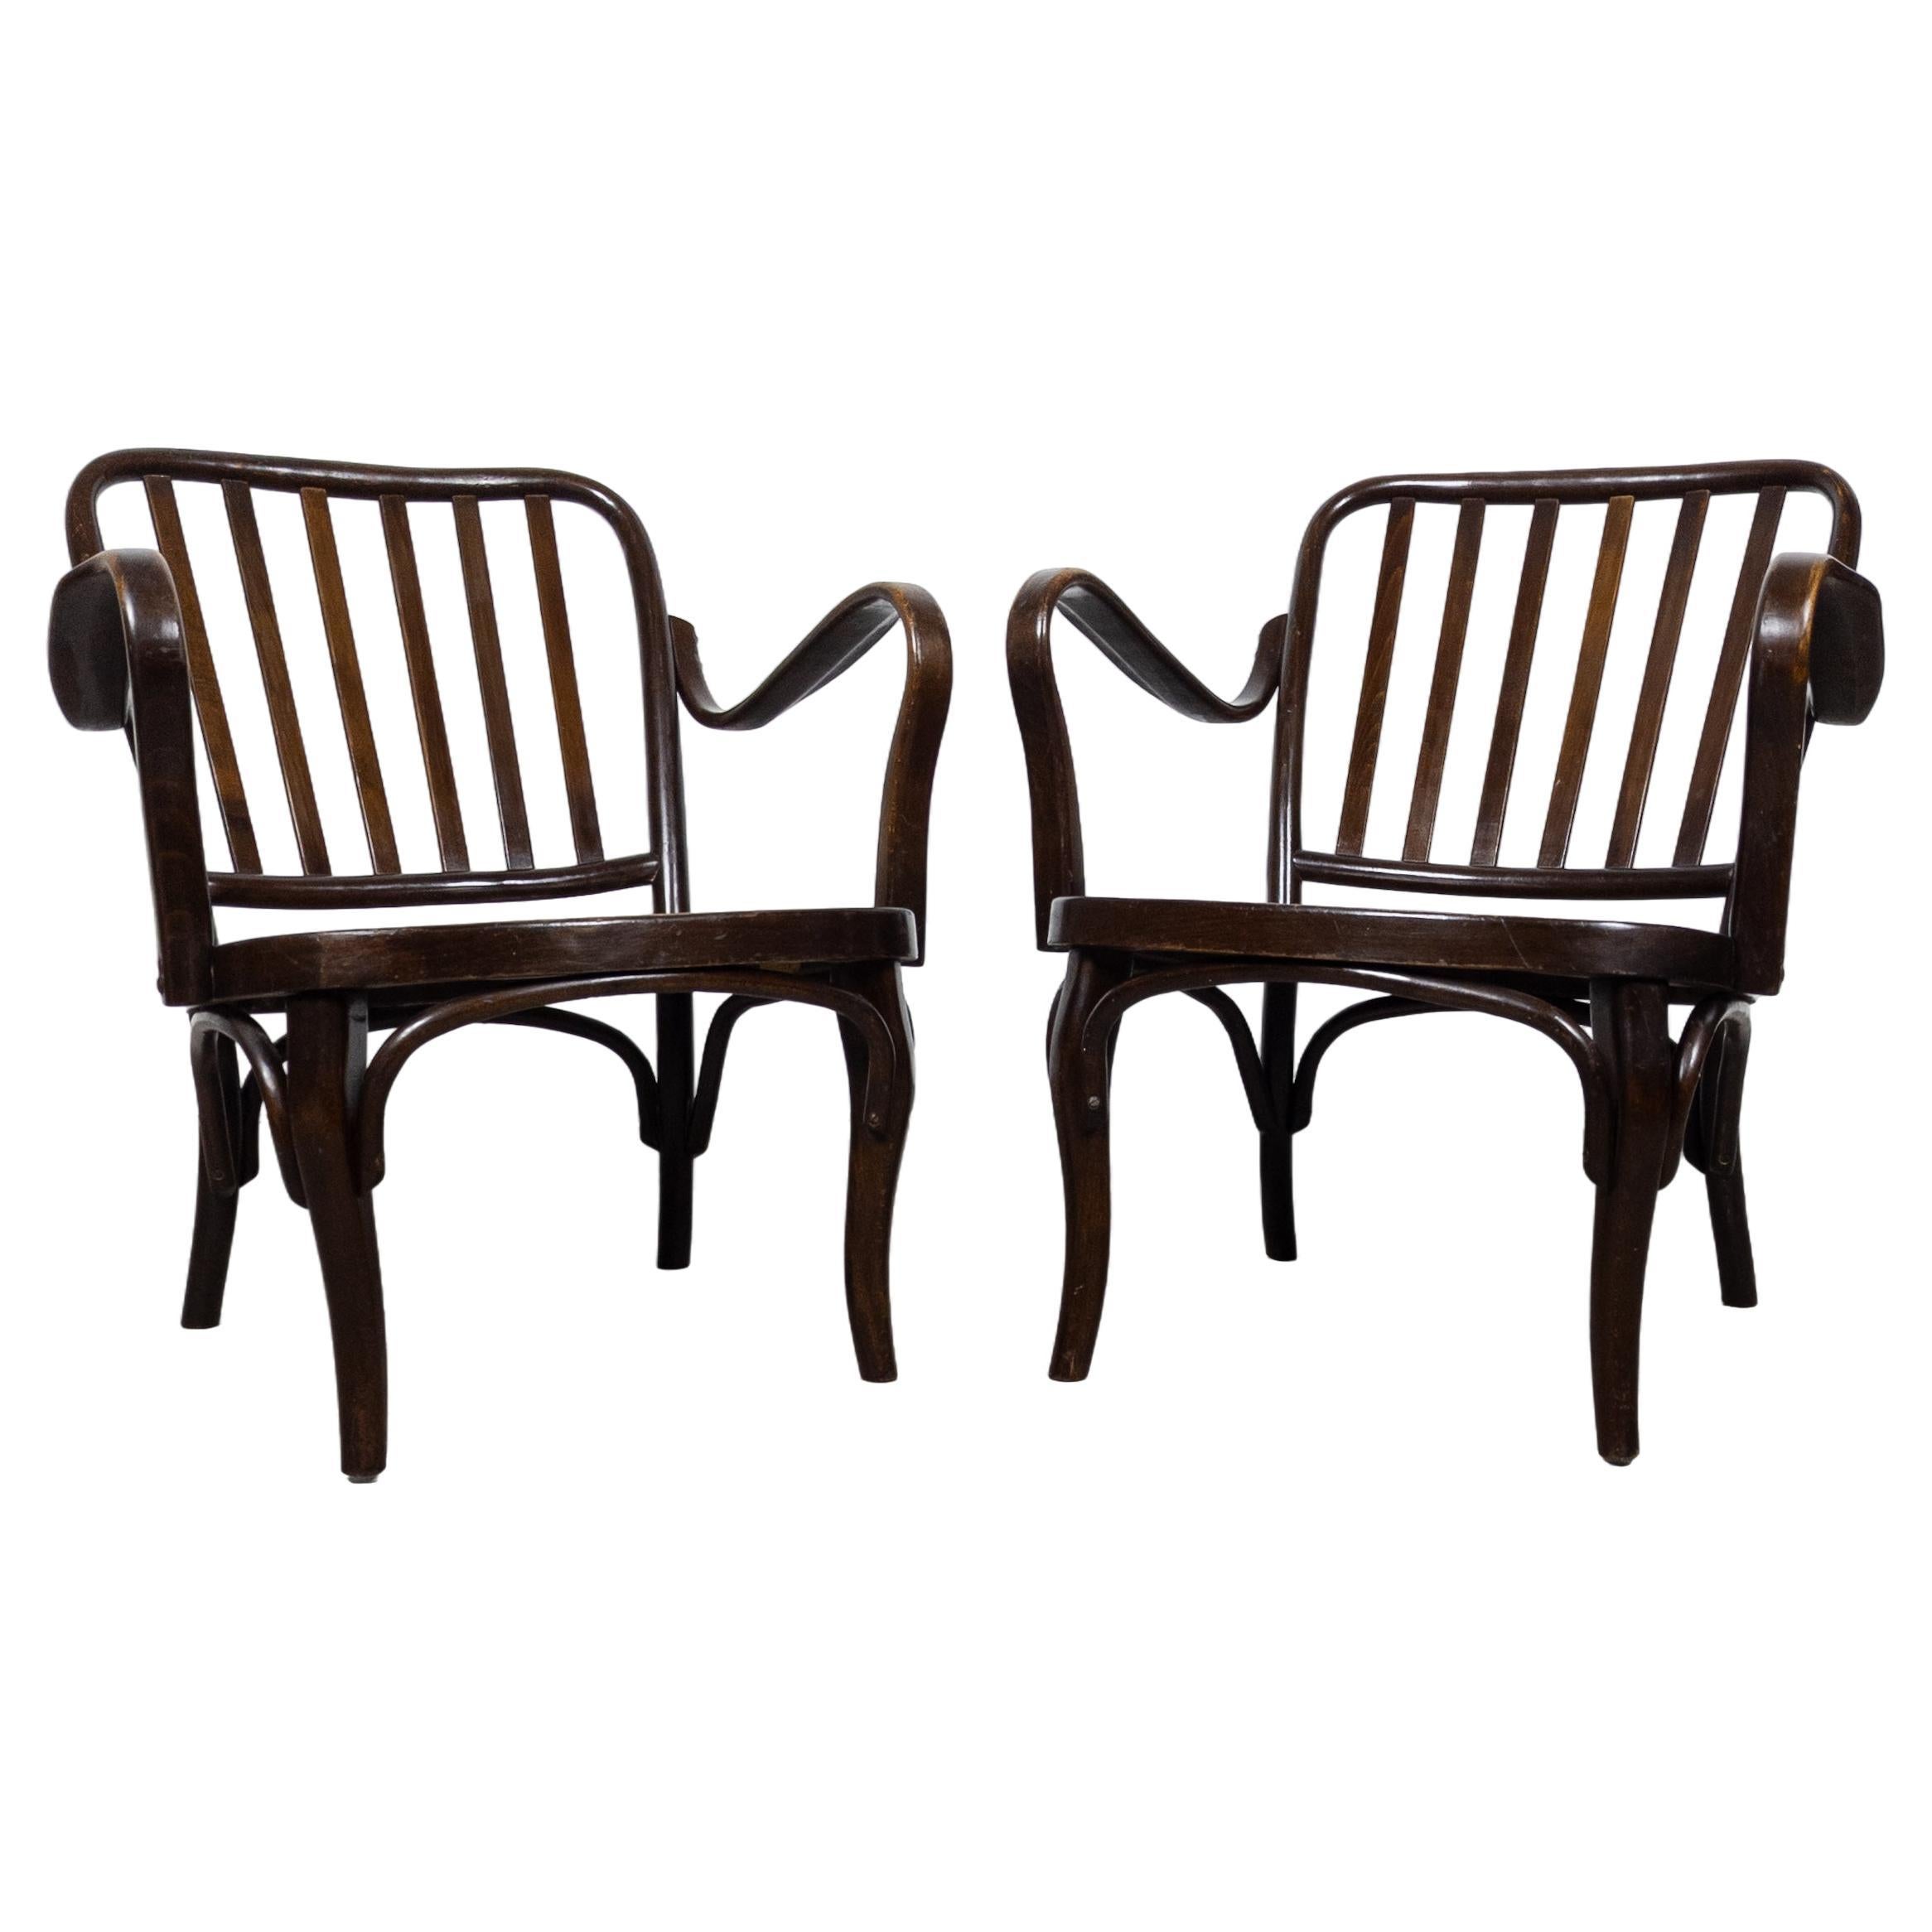 Pair of fireside armchairs Thonet A 752 by Josef Frank For Sale